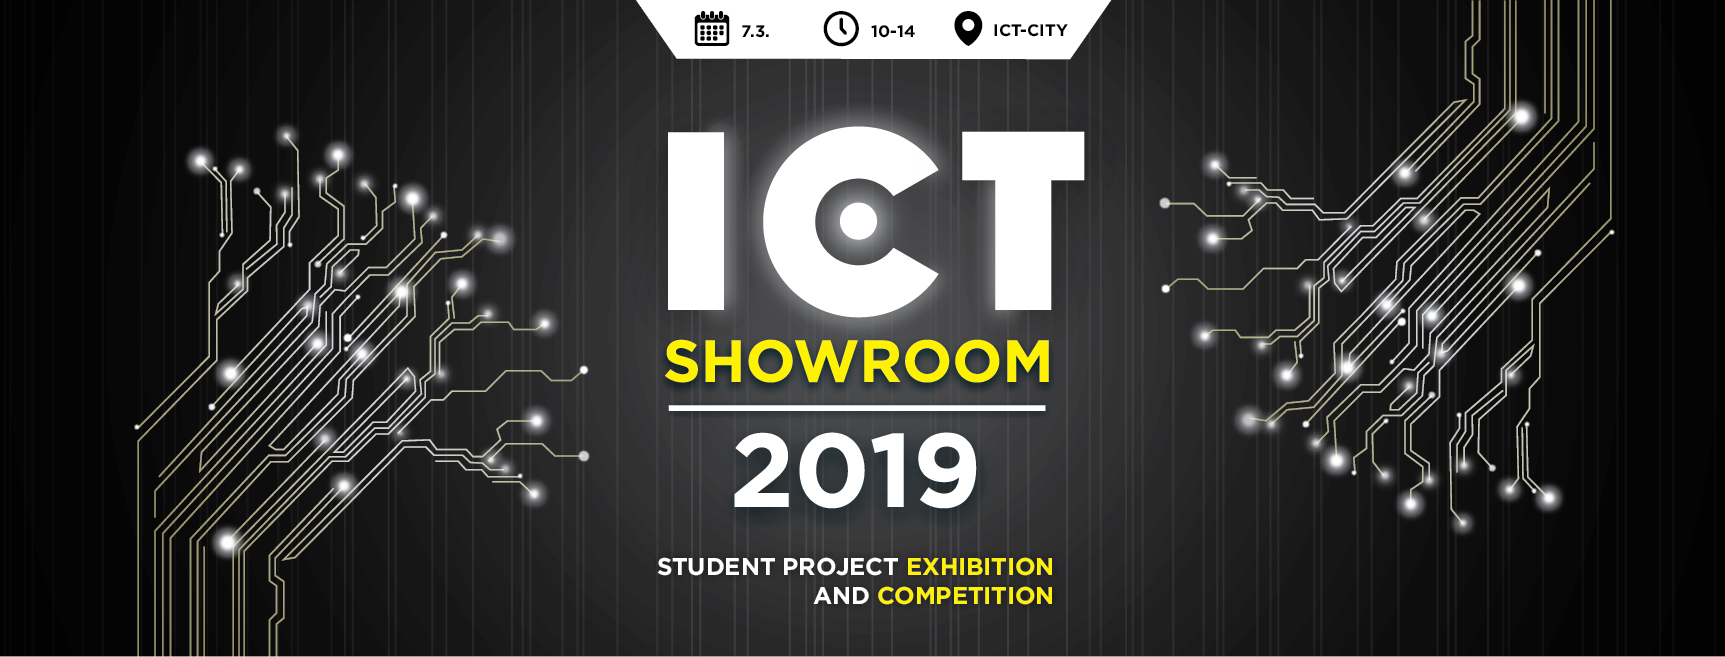 ICT Showroom 2019, date: March 7th 2019, time: 10:00-14:00 / 10am - 2pm, place: ICT City, Turku 